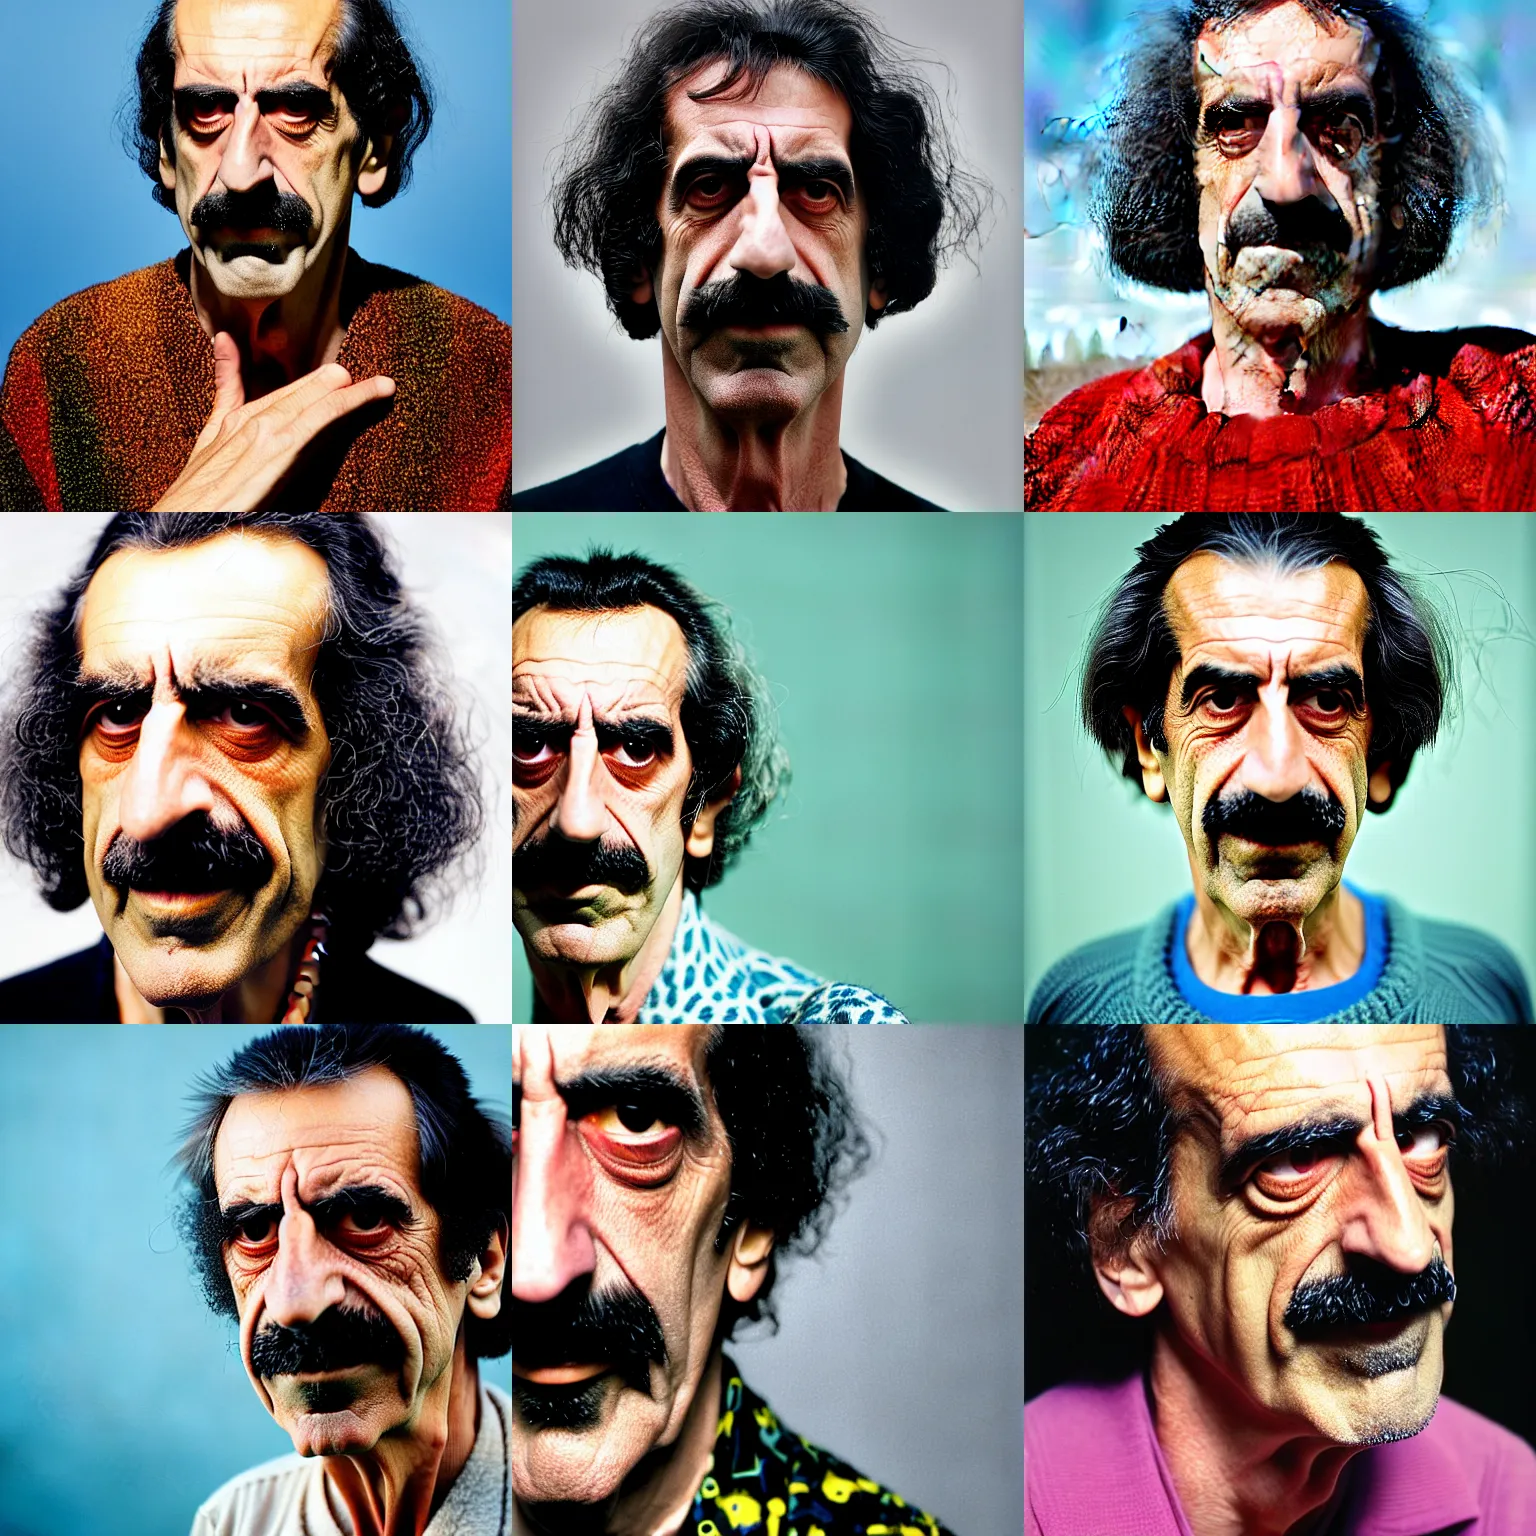 Prompt: a close up color portrait of frank zappa in old age with background scenery by juergen teller, iris van herpen rankin, ring - flash